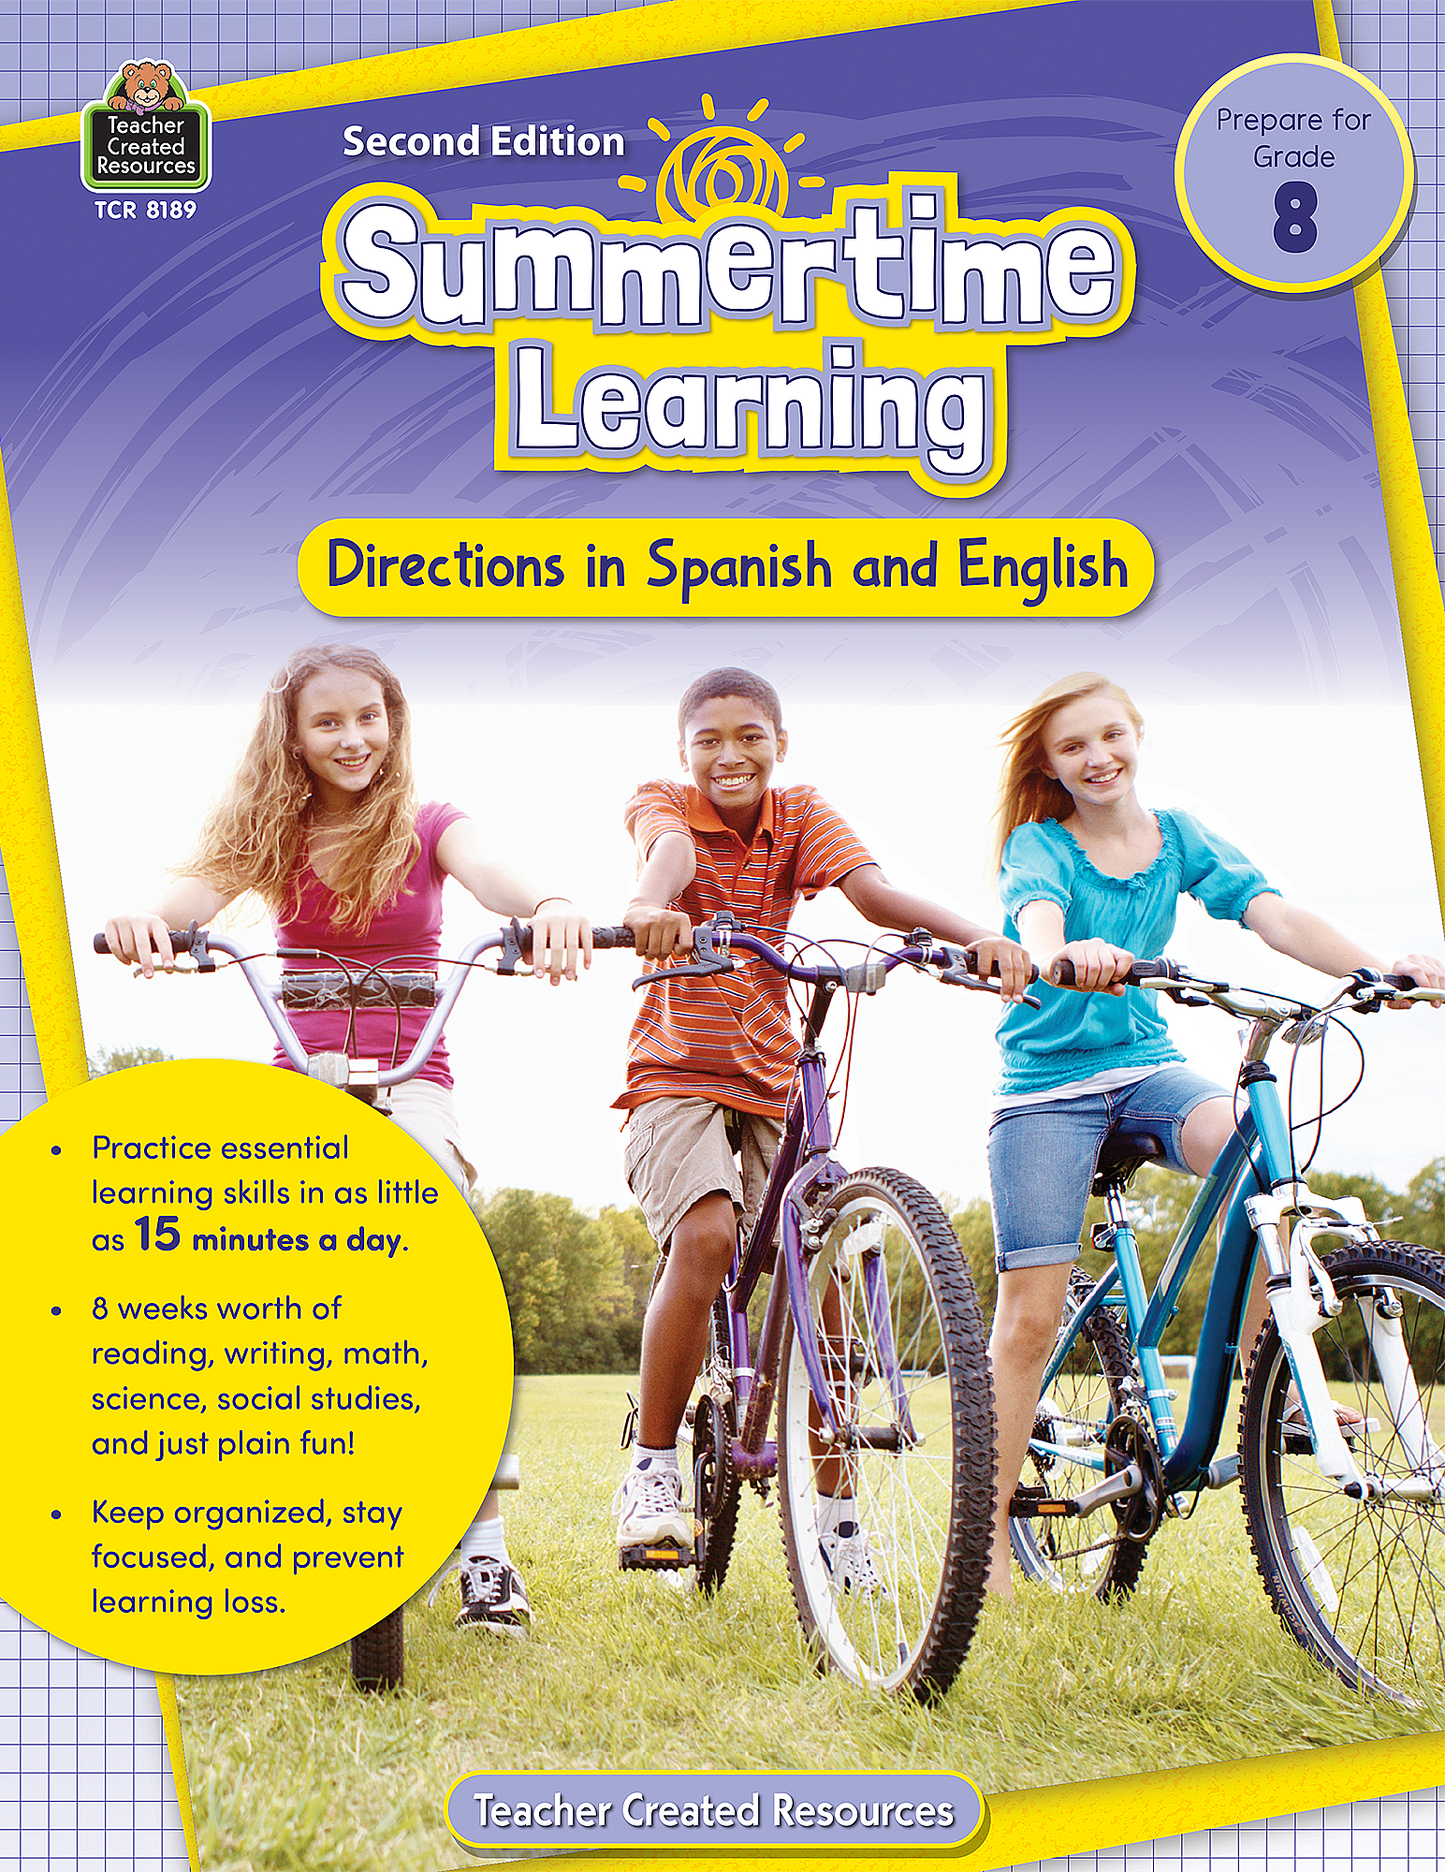 Summertime Learning: English and Spanish Directions, Second Edition (Prep. for Gr. 8)